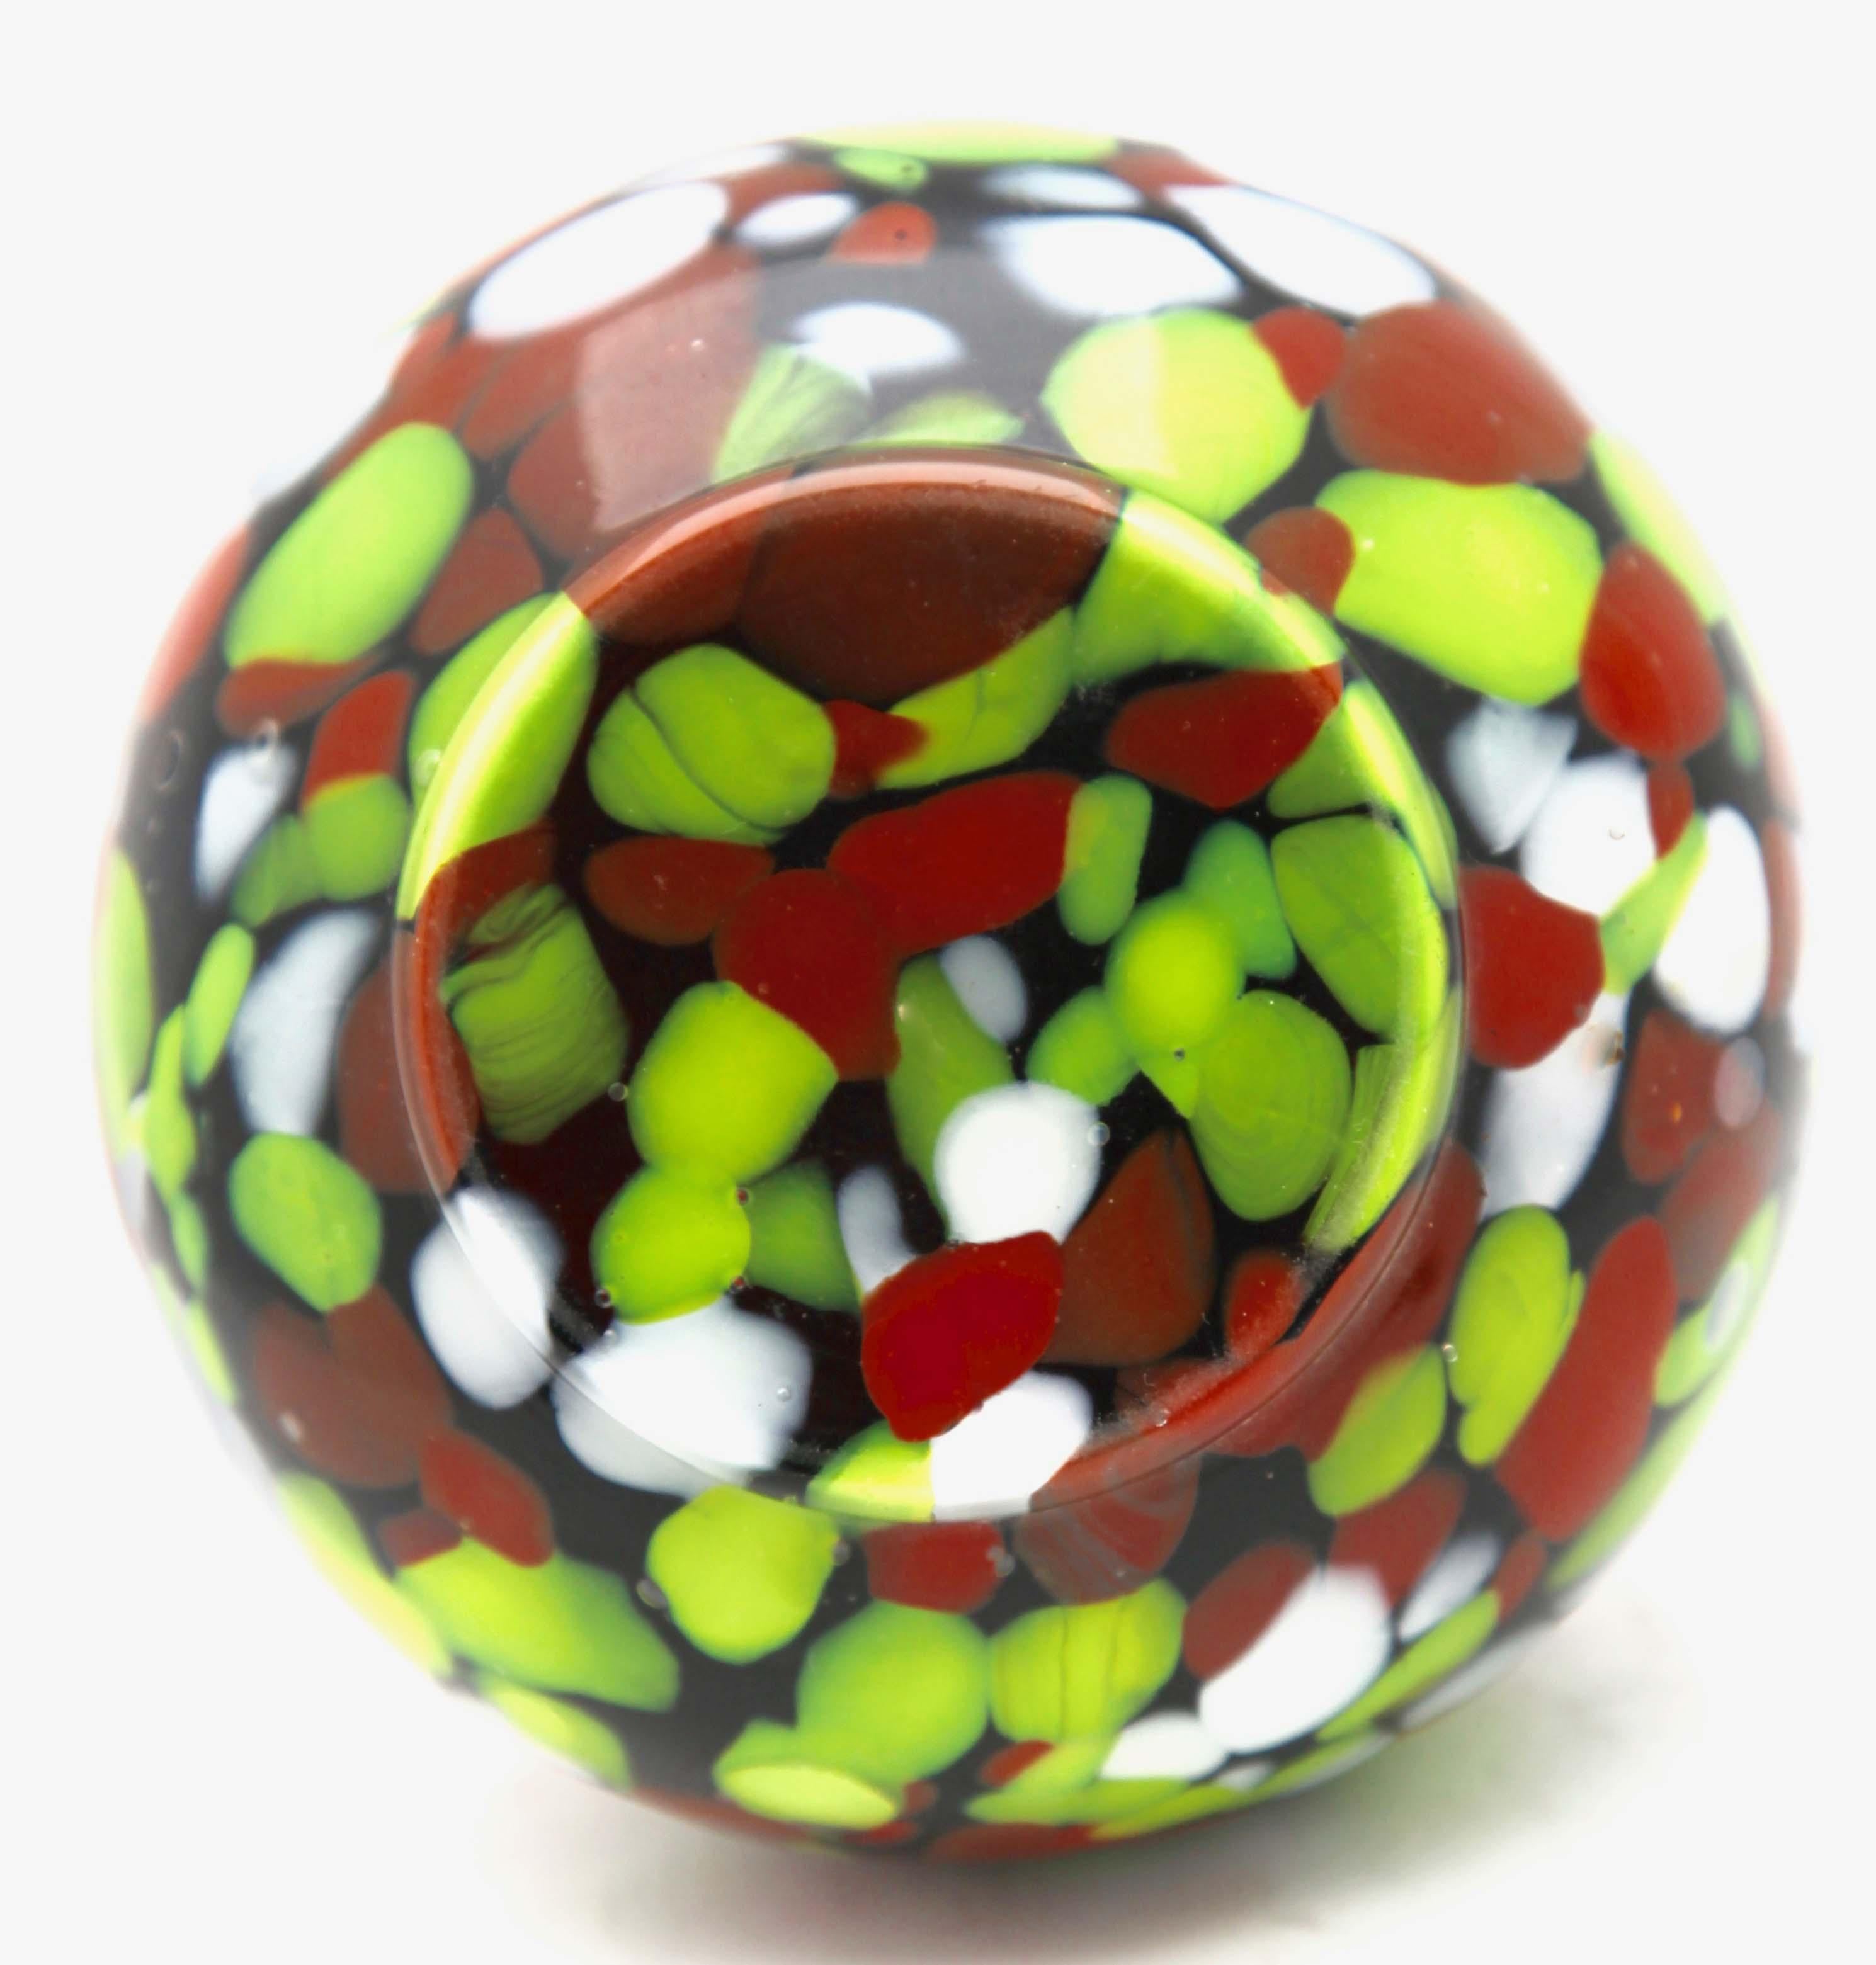 Art Glass 'Pique Fleurs' Vase in Red, White, Green Splatter Colors, with Grille For Sale